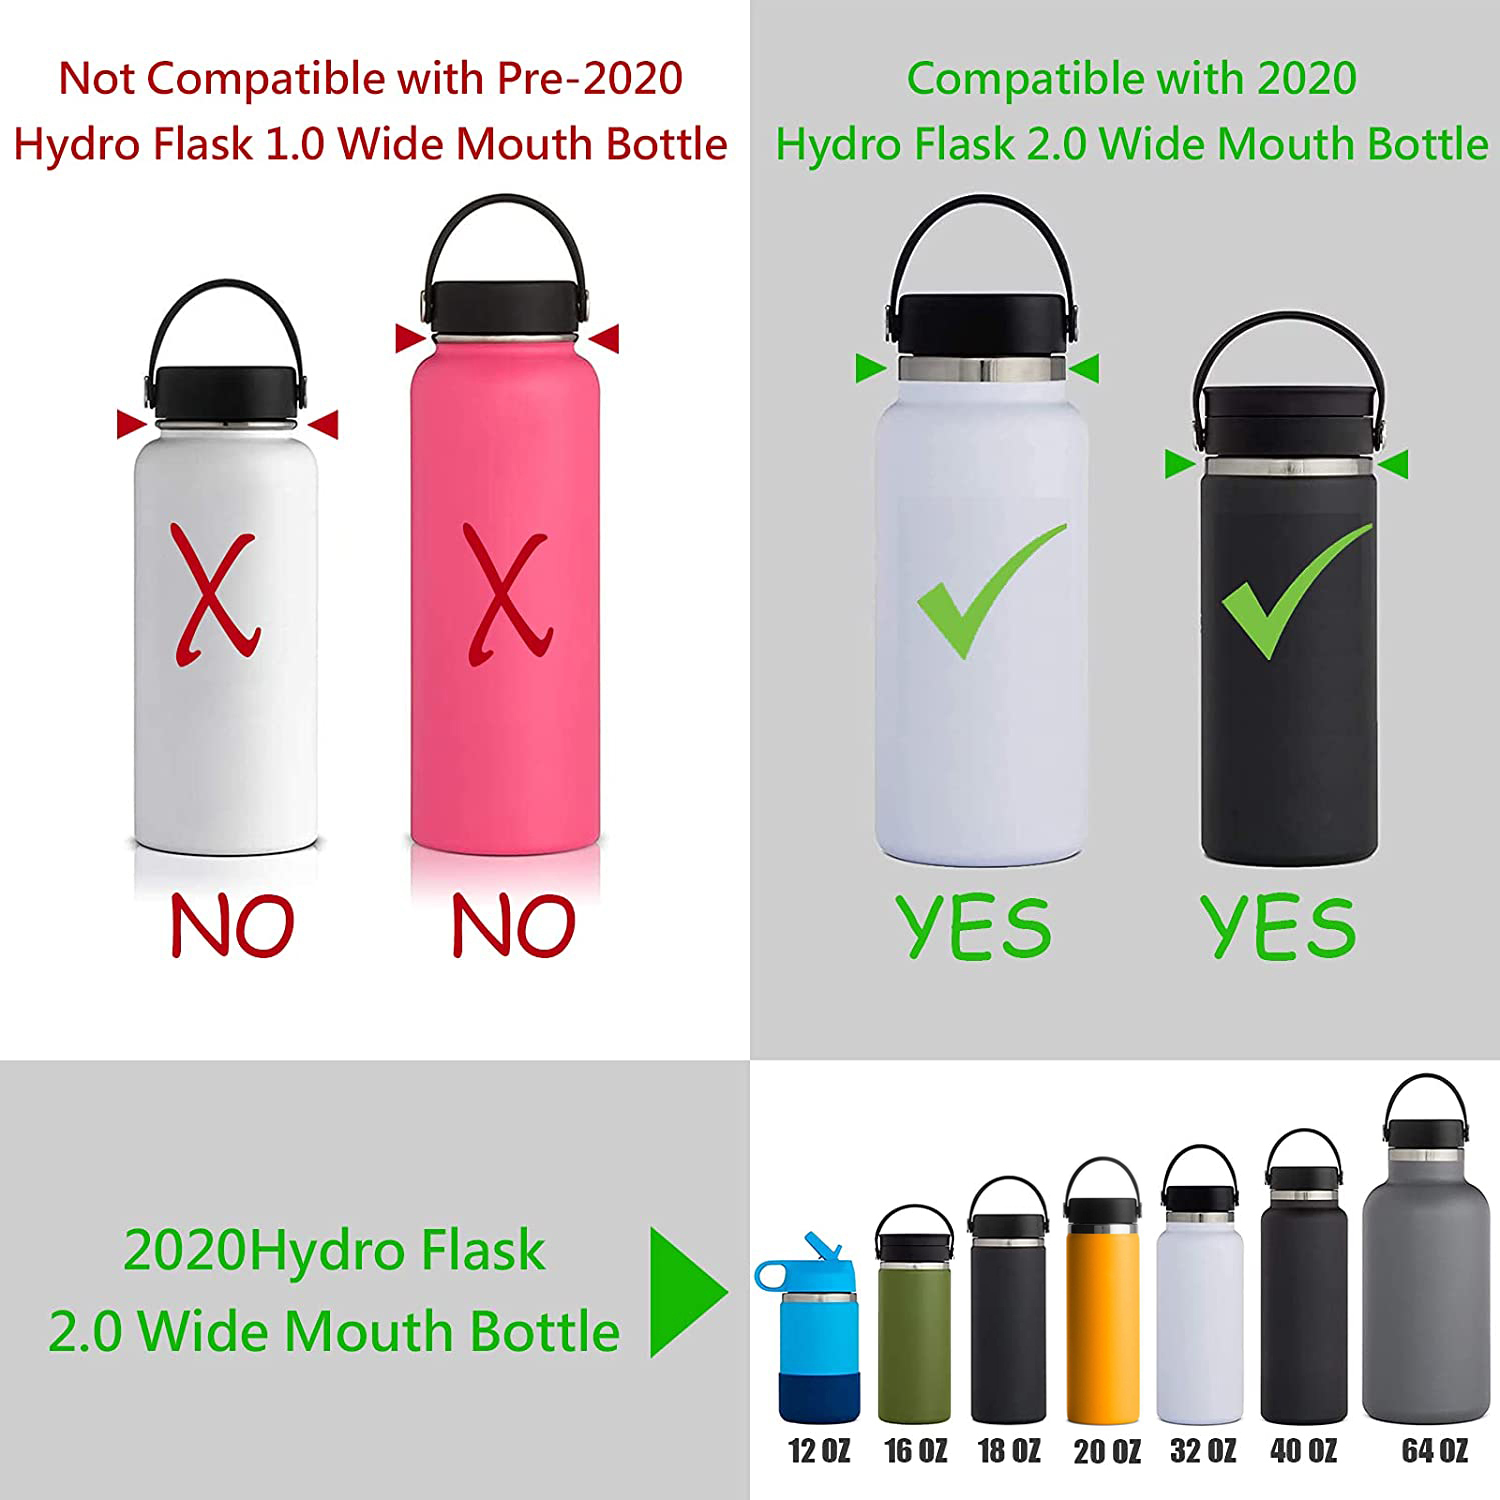 Hydro Flask Para Handle Strap Safety Ropes New for hydro flask Bottles Wide Mouth 